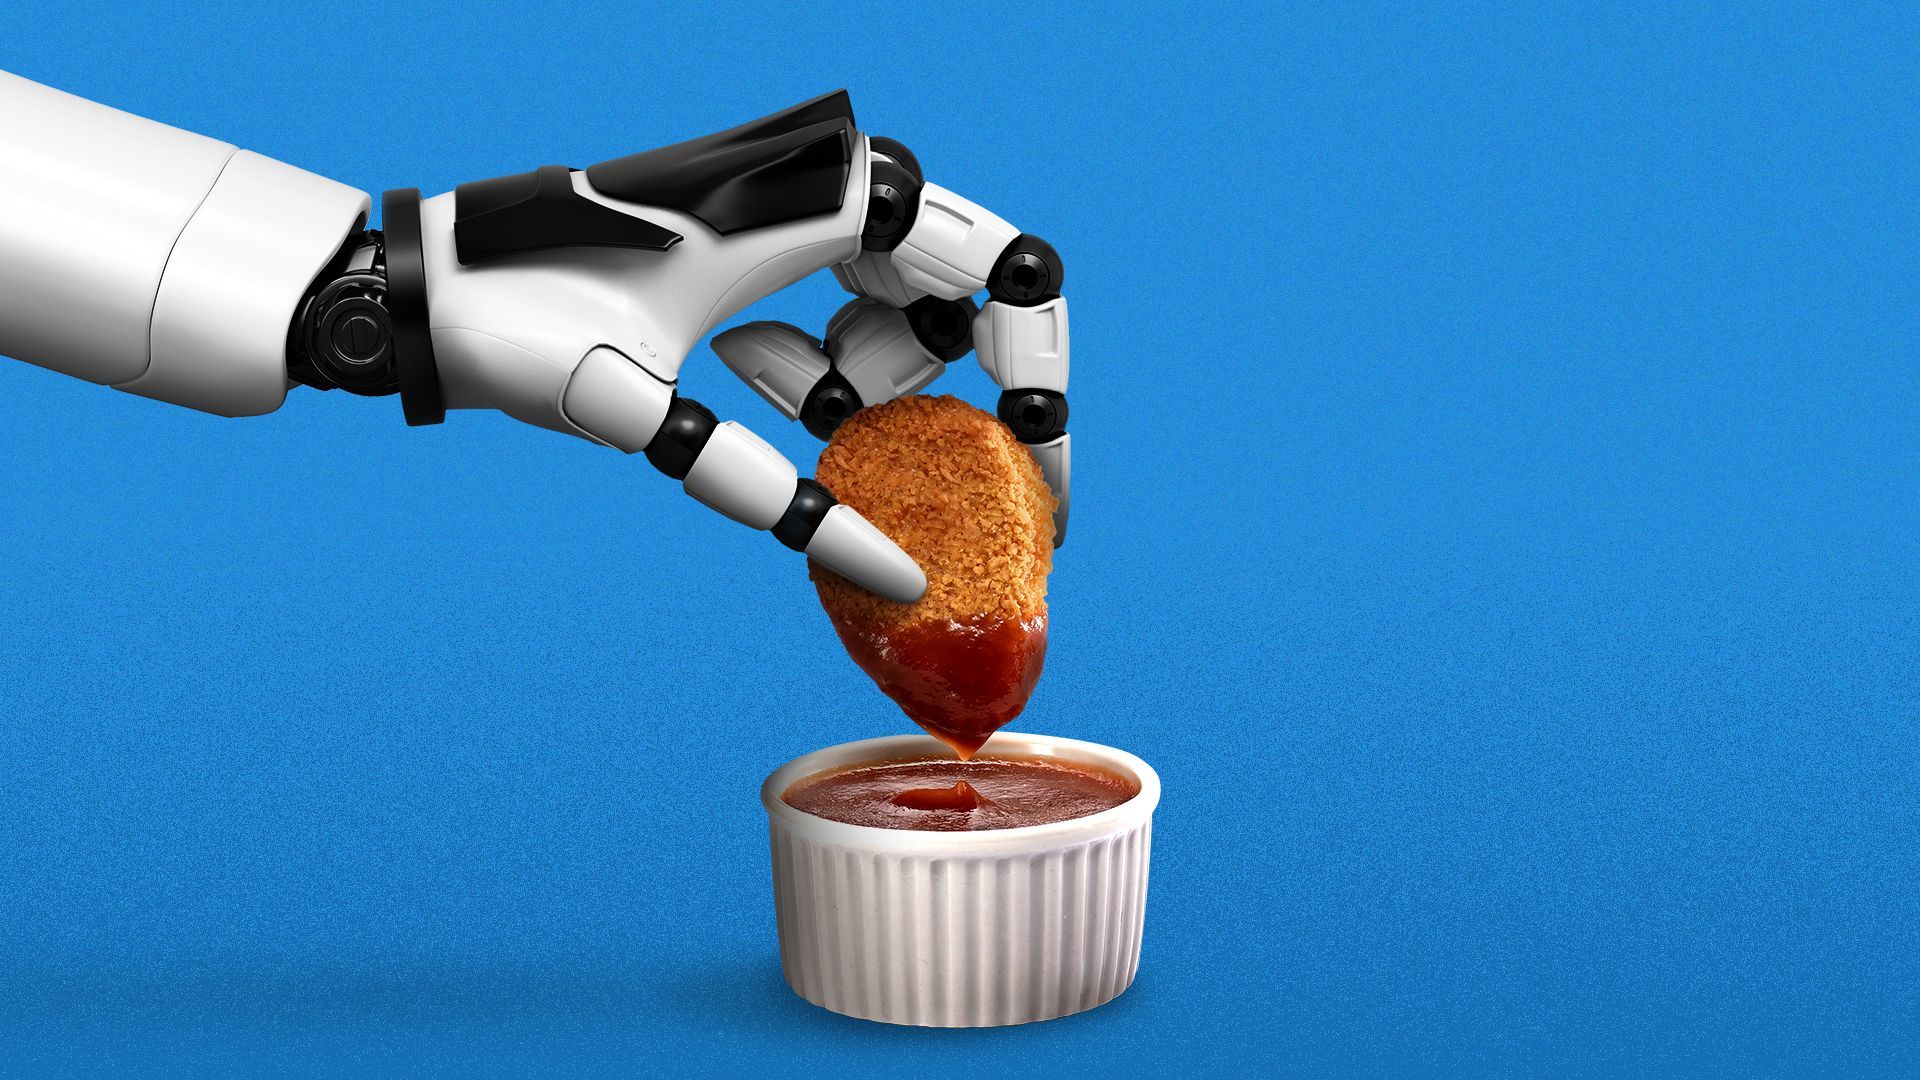 Illustration of a robotic hand dipping a chicken nugget in sauce.